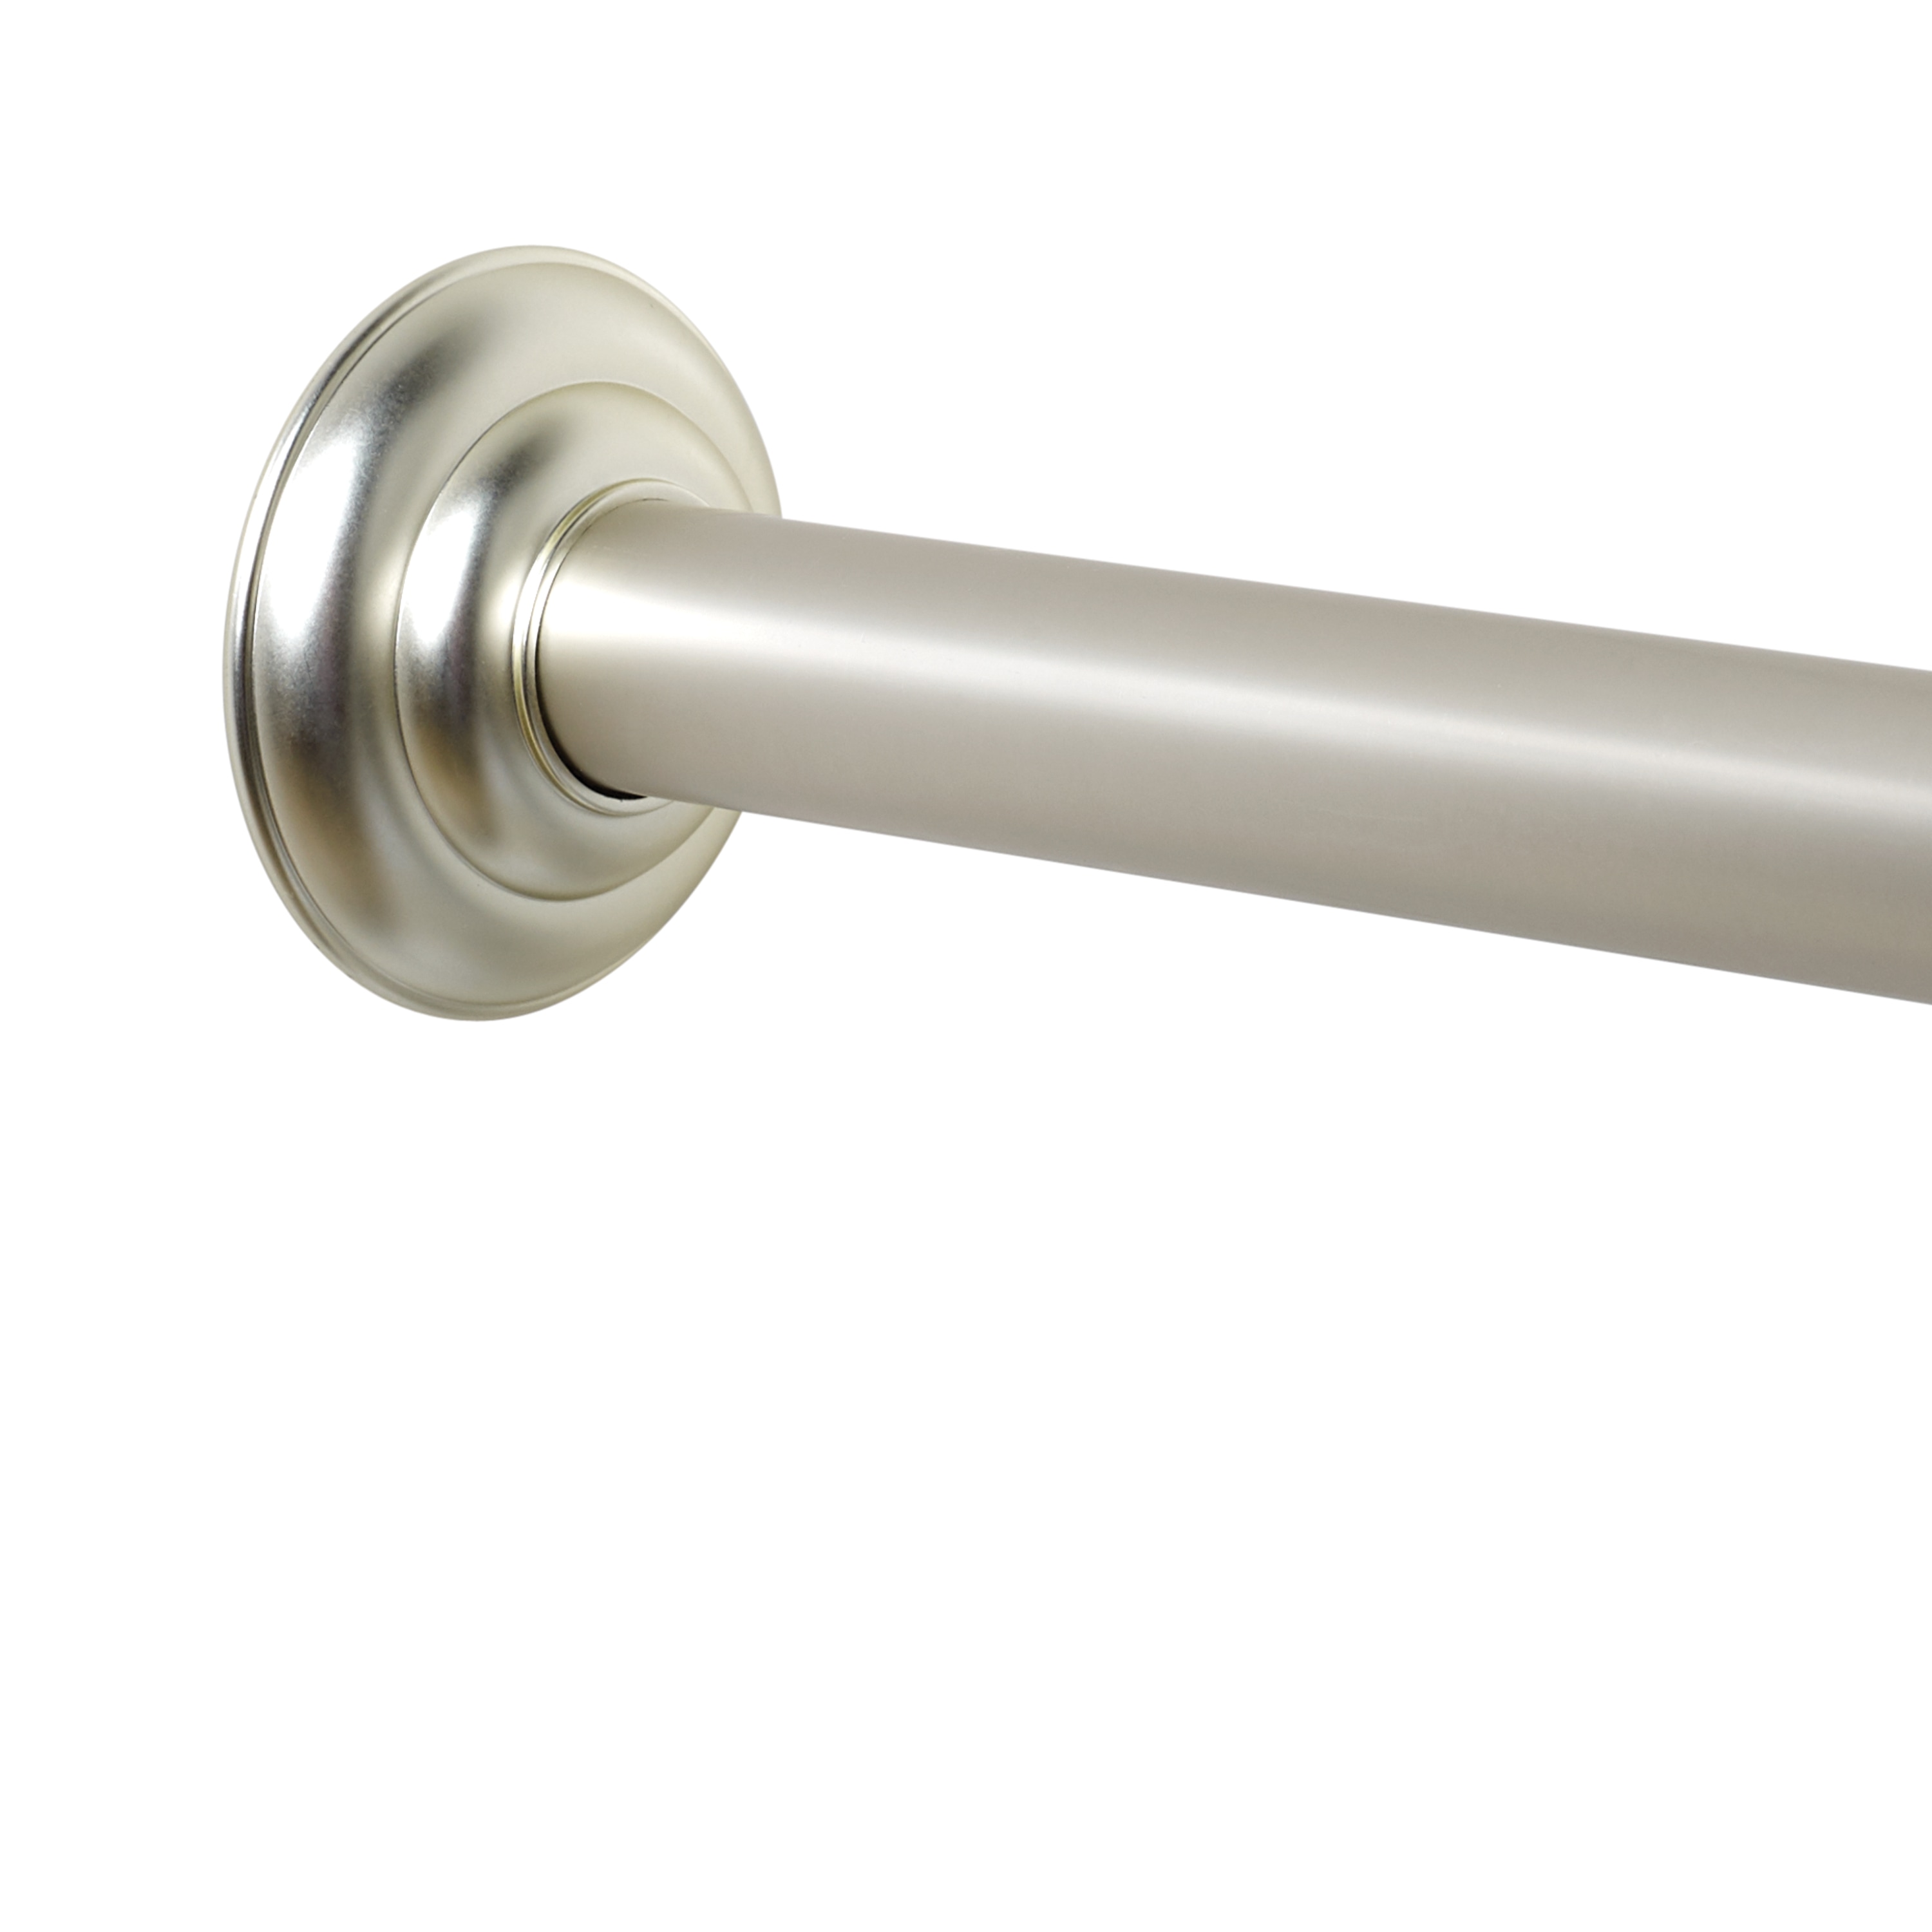 Swcorp AC-AZSR88BN 48-88 in. Anzzi Shower Curtain Rod with Shower Hooks in Brushed Nickel